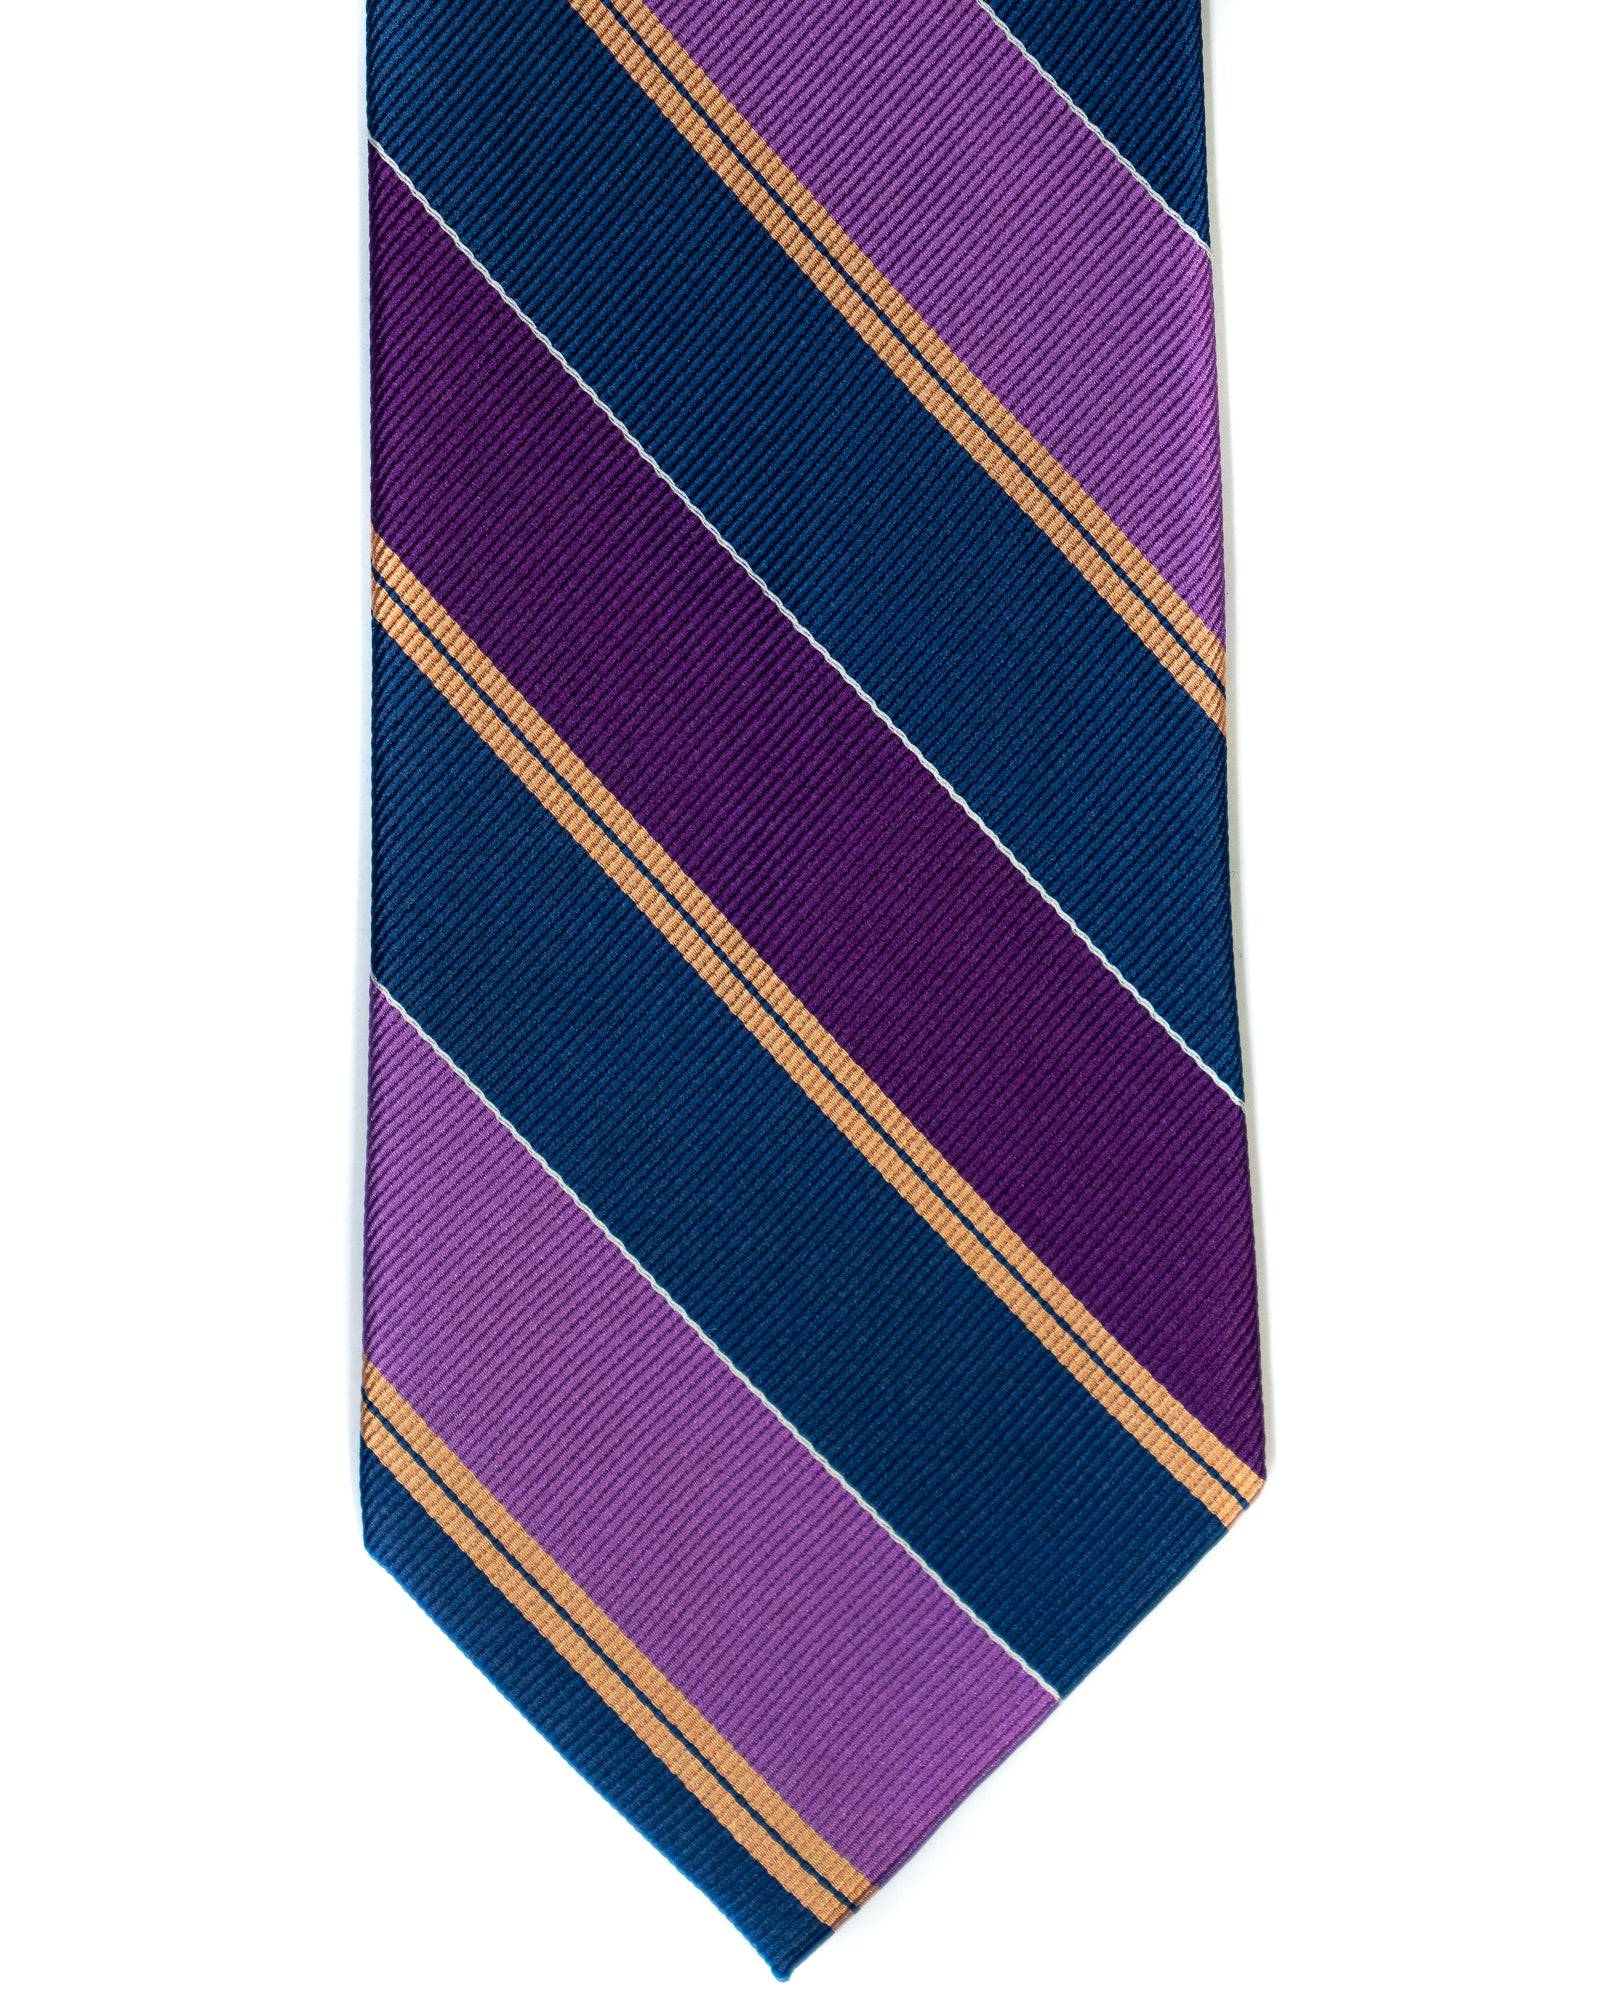 Silk Tie In Purple With Navy Stripes - Rainwater's Men's Clothing and Tuxedo Rental